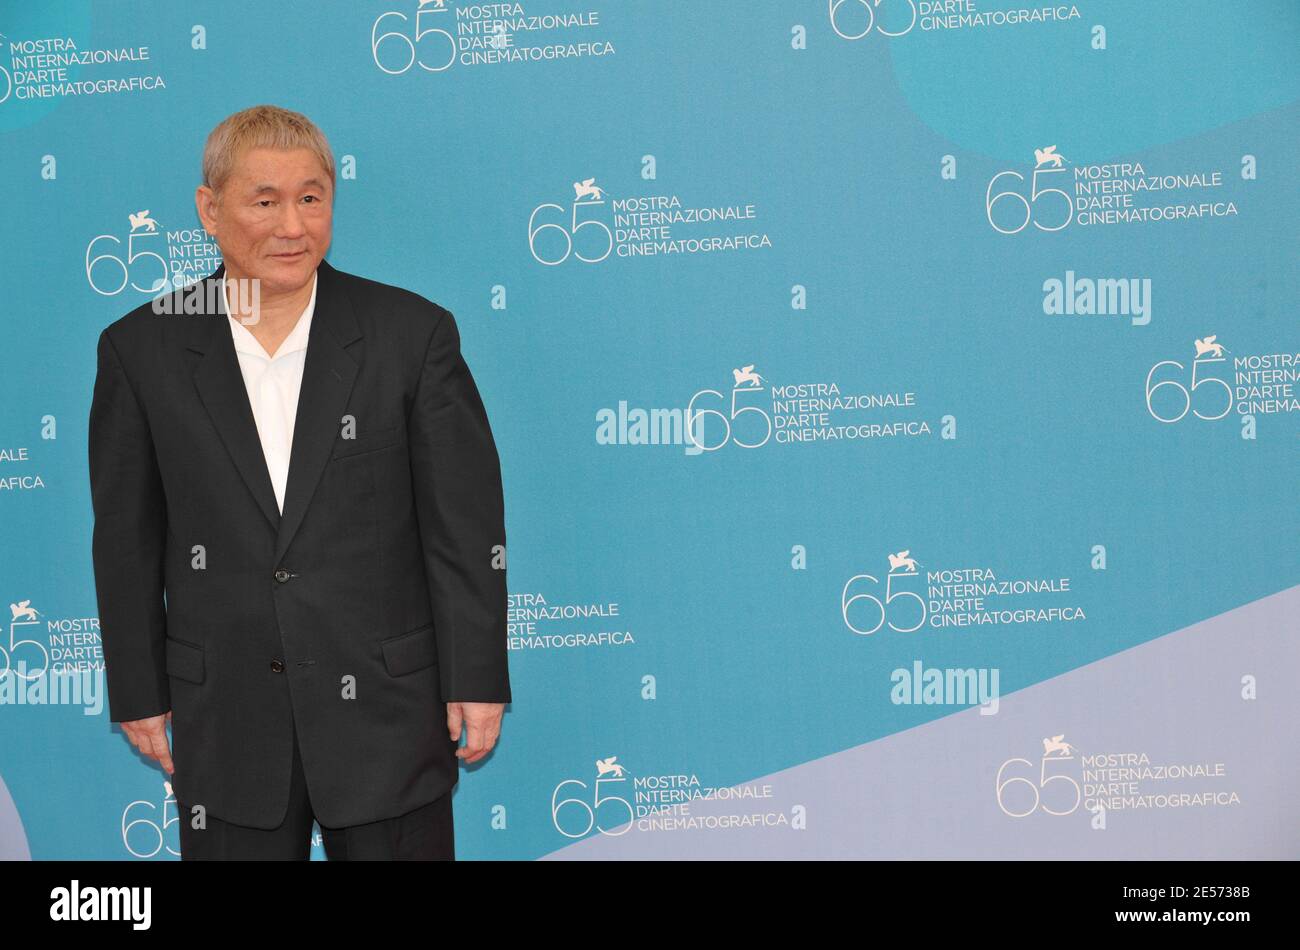 Japanese director Takeshi Kitano poses during a photocall for his movie 'Achilles to Kame' during the 65th Mostra Venice Film Festival at Venice Lido in Venice, Italy on August 28, 2008. Photo by Thierry Orban/ABACAPRESS.COM Stock Photo